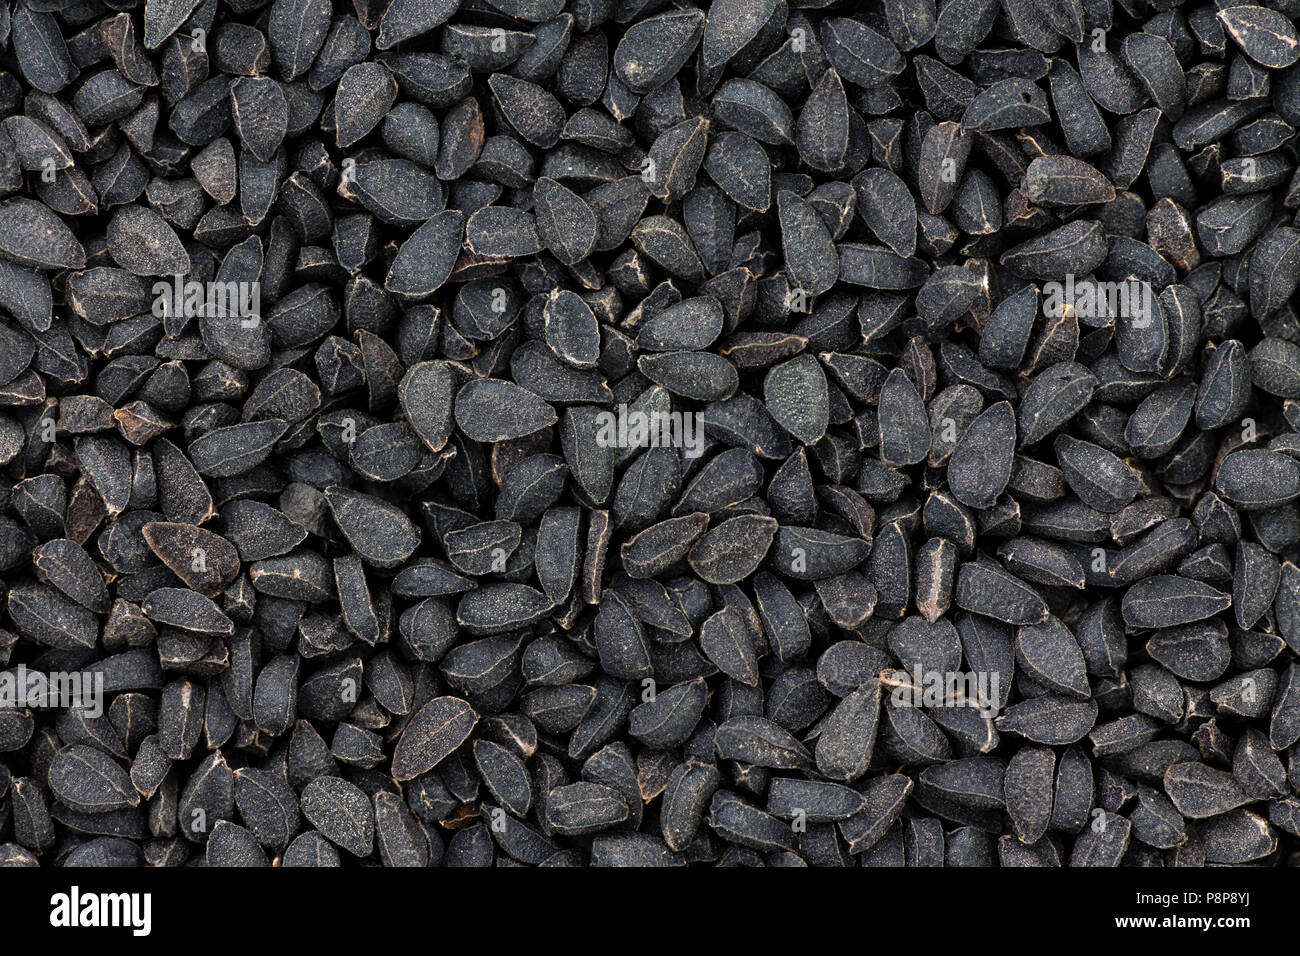 Close up texture of black seeds or nigella also known as kalonji, an ancient spice from India known for its pungent taste and medicinal qualities Stock Photo